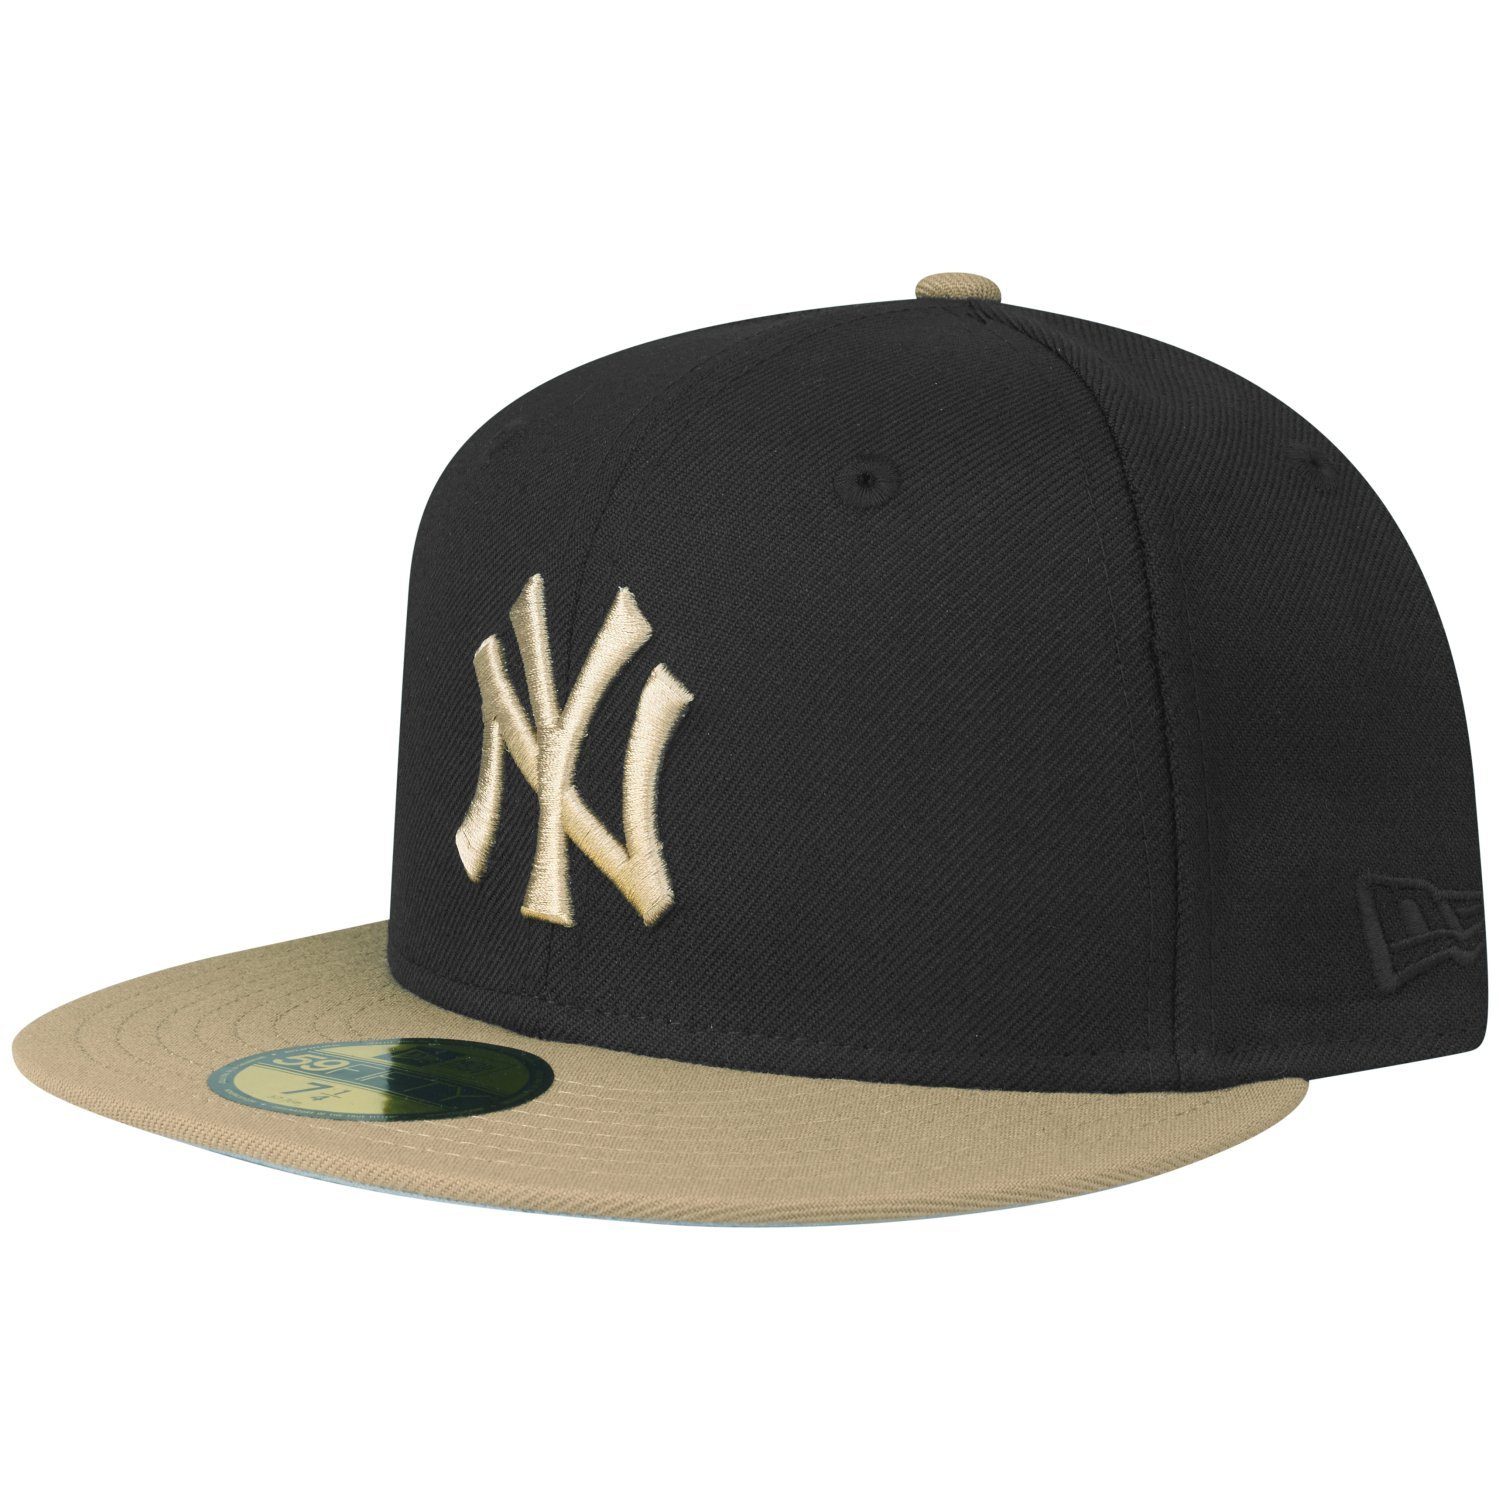 New Era Fitted Cap 59Fifty New York Yankees